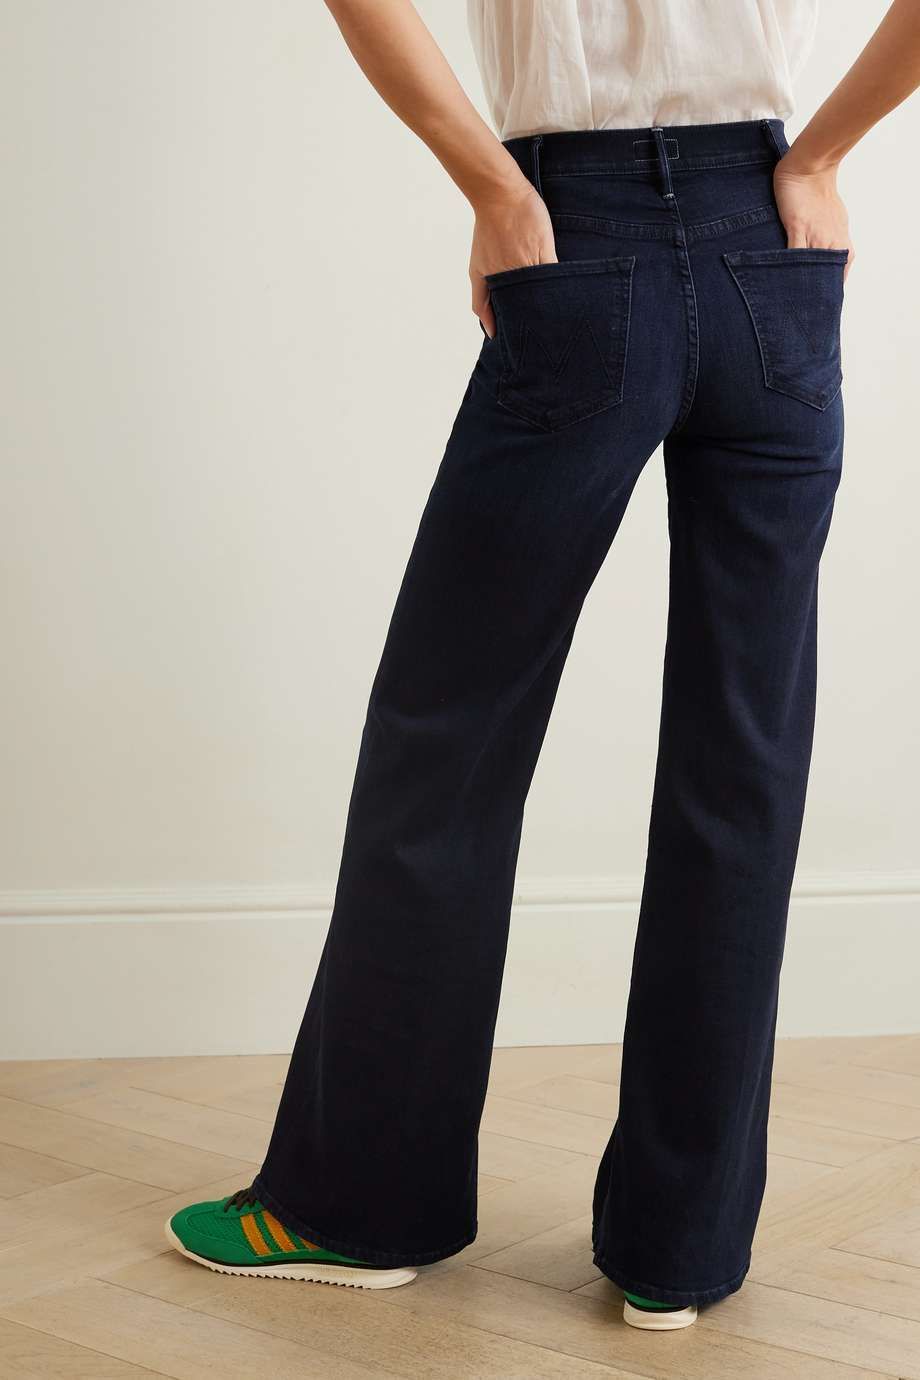 Grab A Pair Of These Butt-Lifting Jeans That Are On Sale Right Now